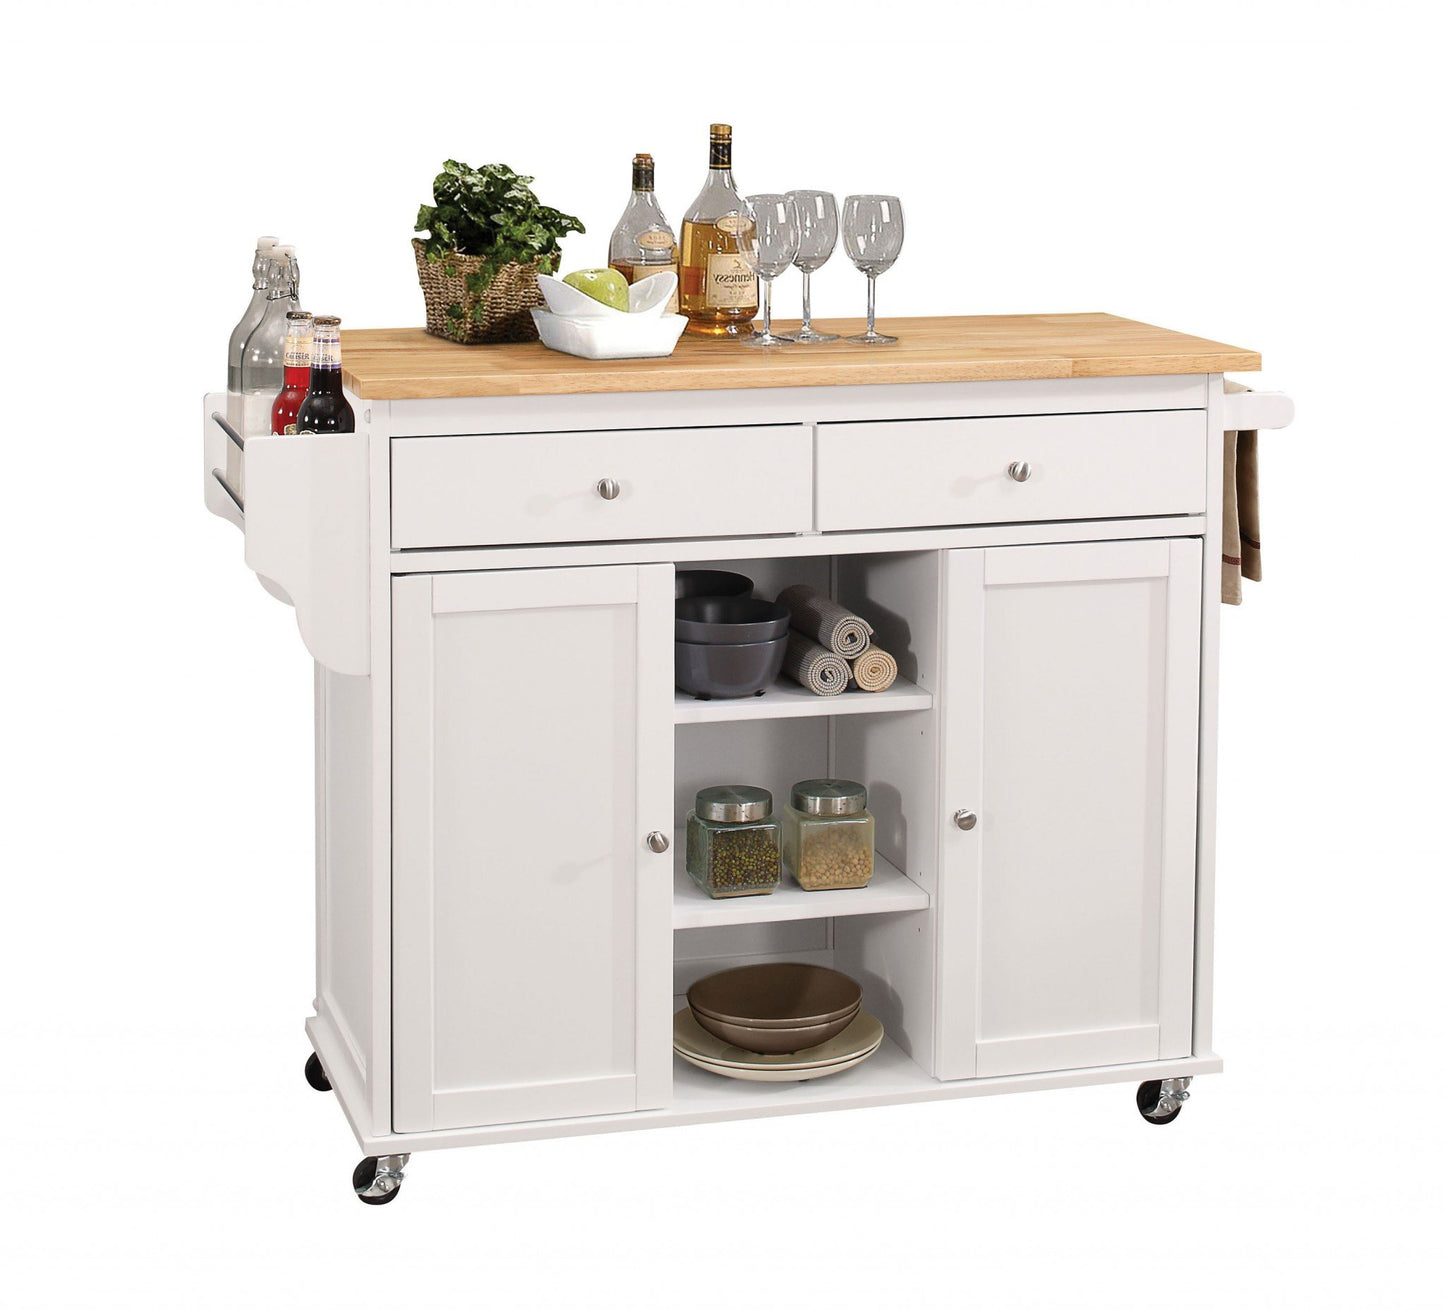 47inches X 18inches X 34inches Natural And White Kitchen Island